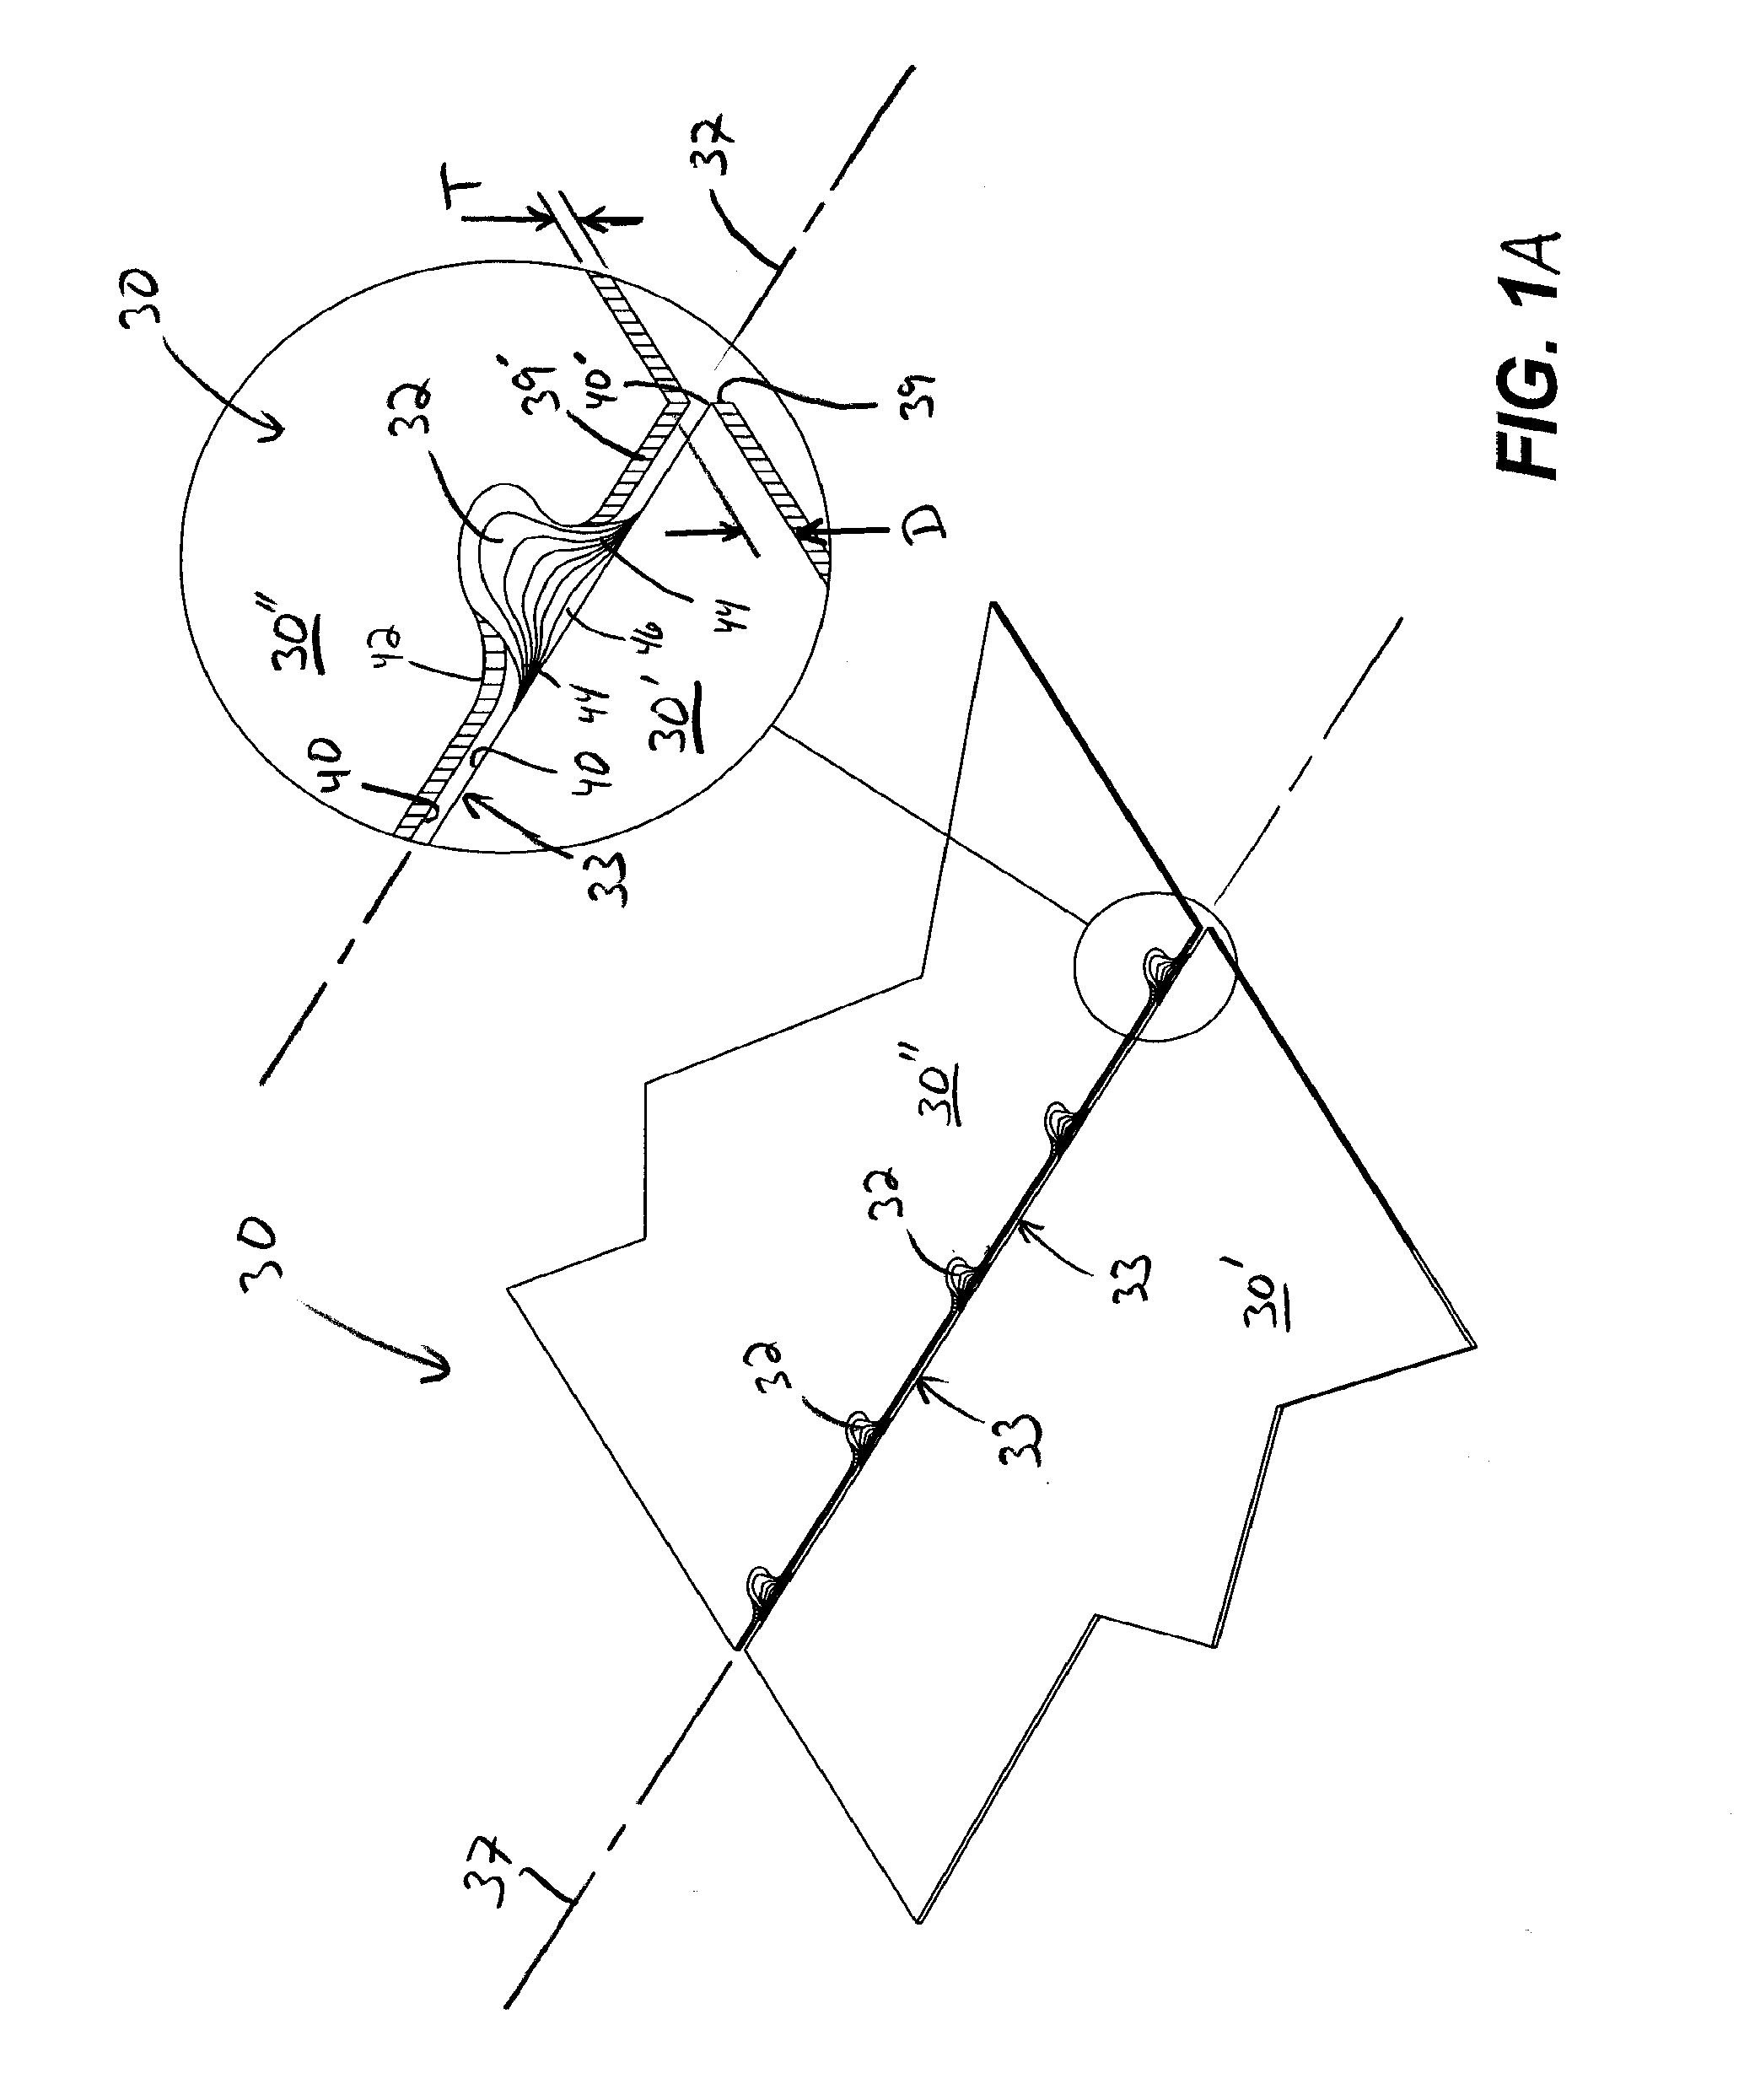 Method and apparatus for forming bend-controlling straps in sheet material